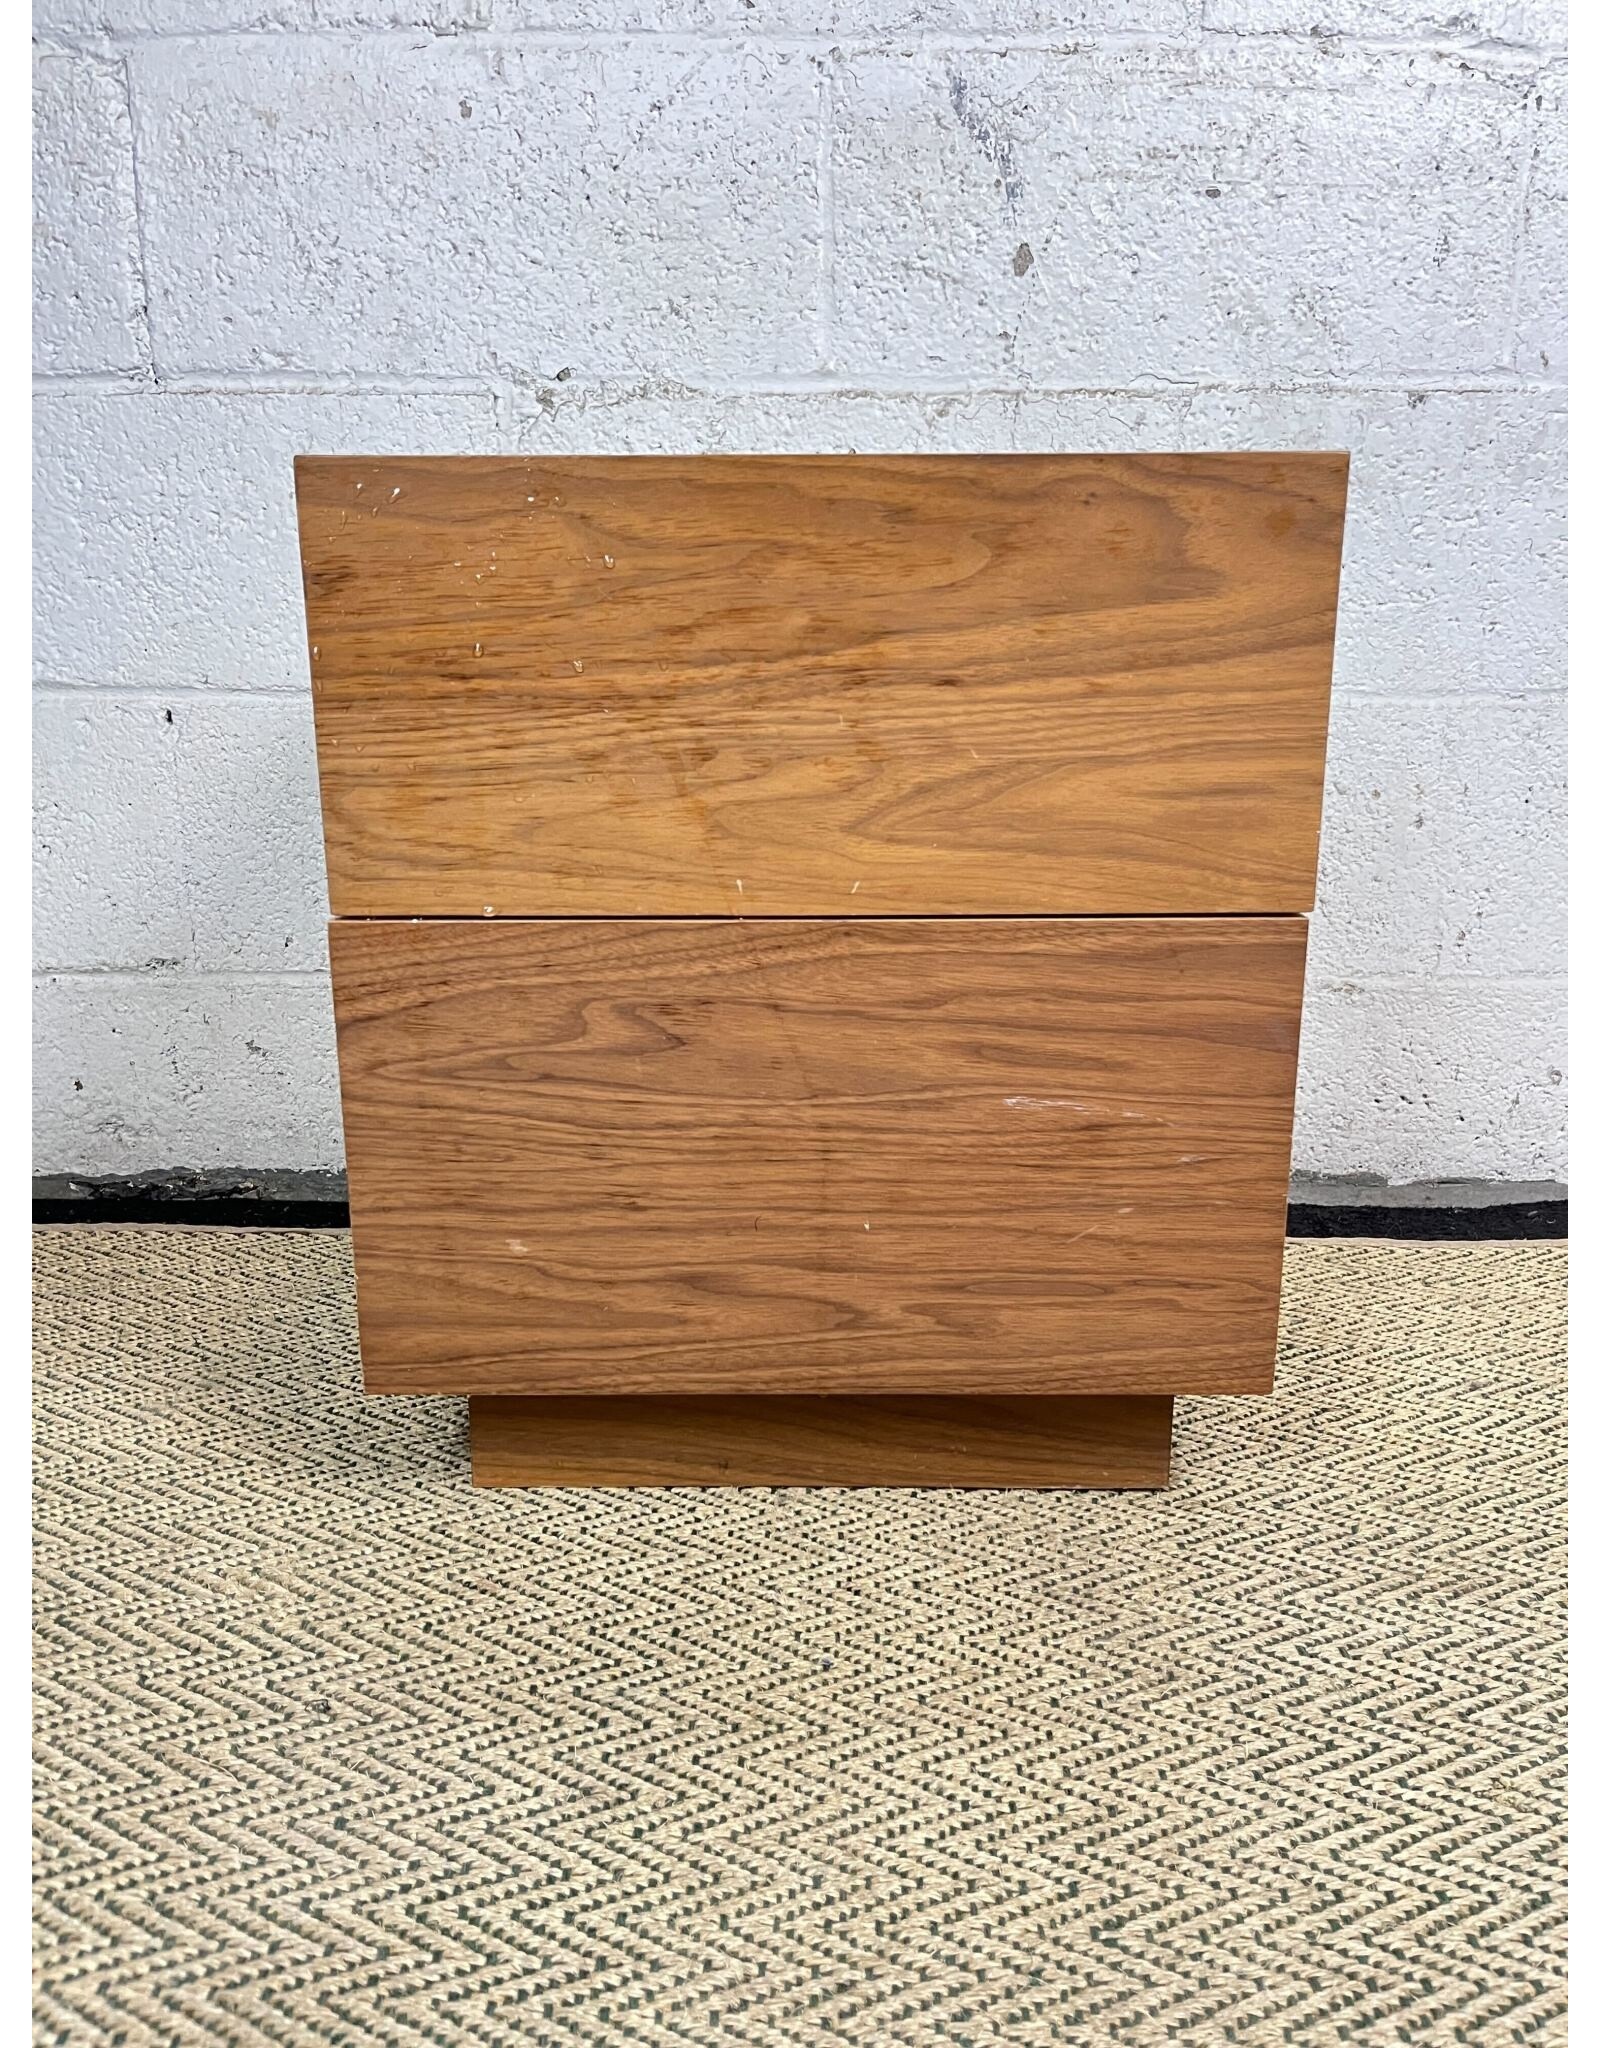 Notched Wooden End Table